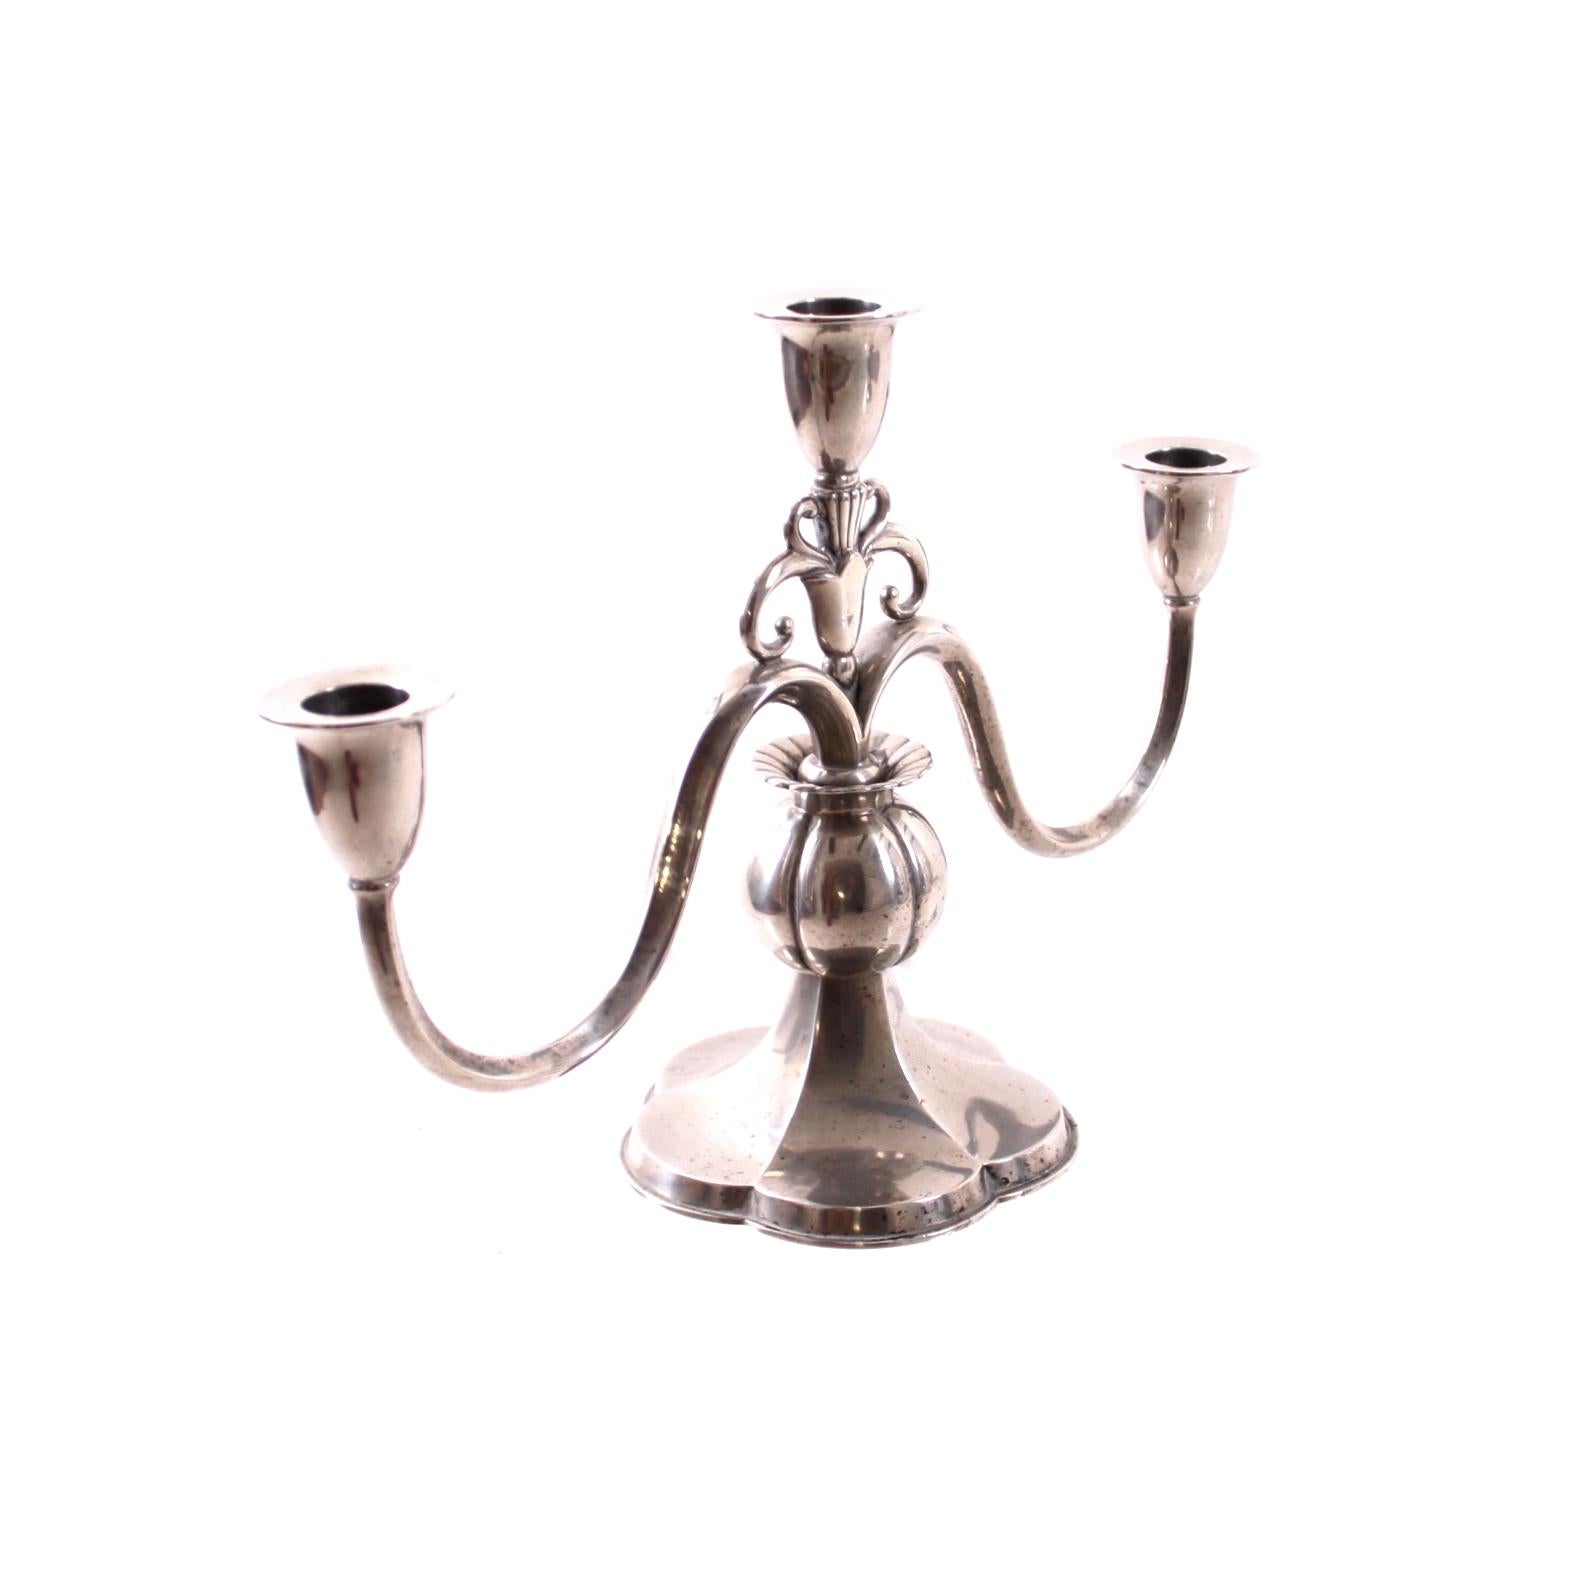 European Rare Pair of Just Andersen Three Armed Candelabras, Pewter, Denmark 1930s For Sale